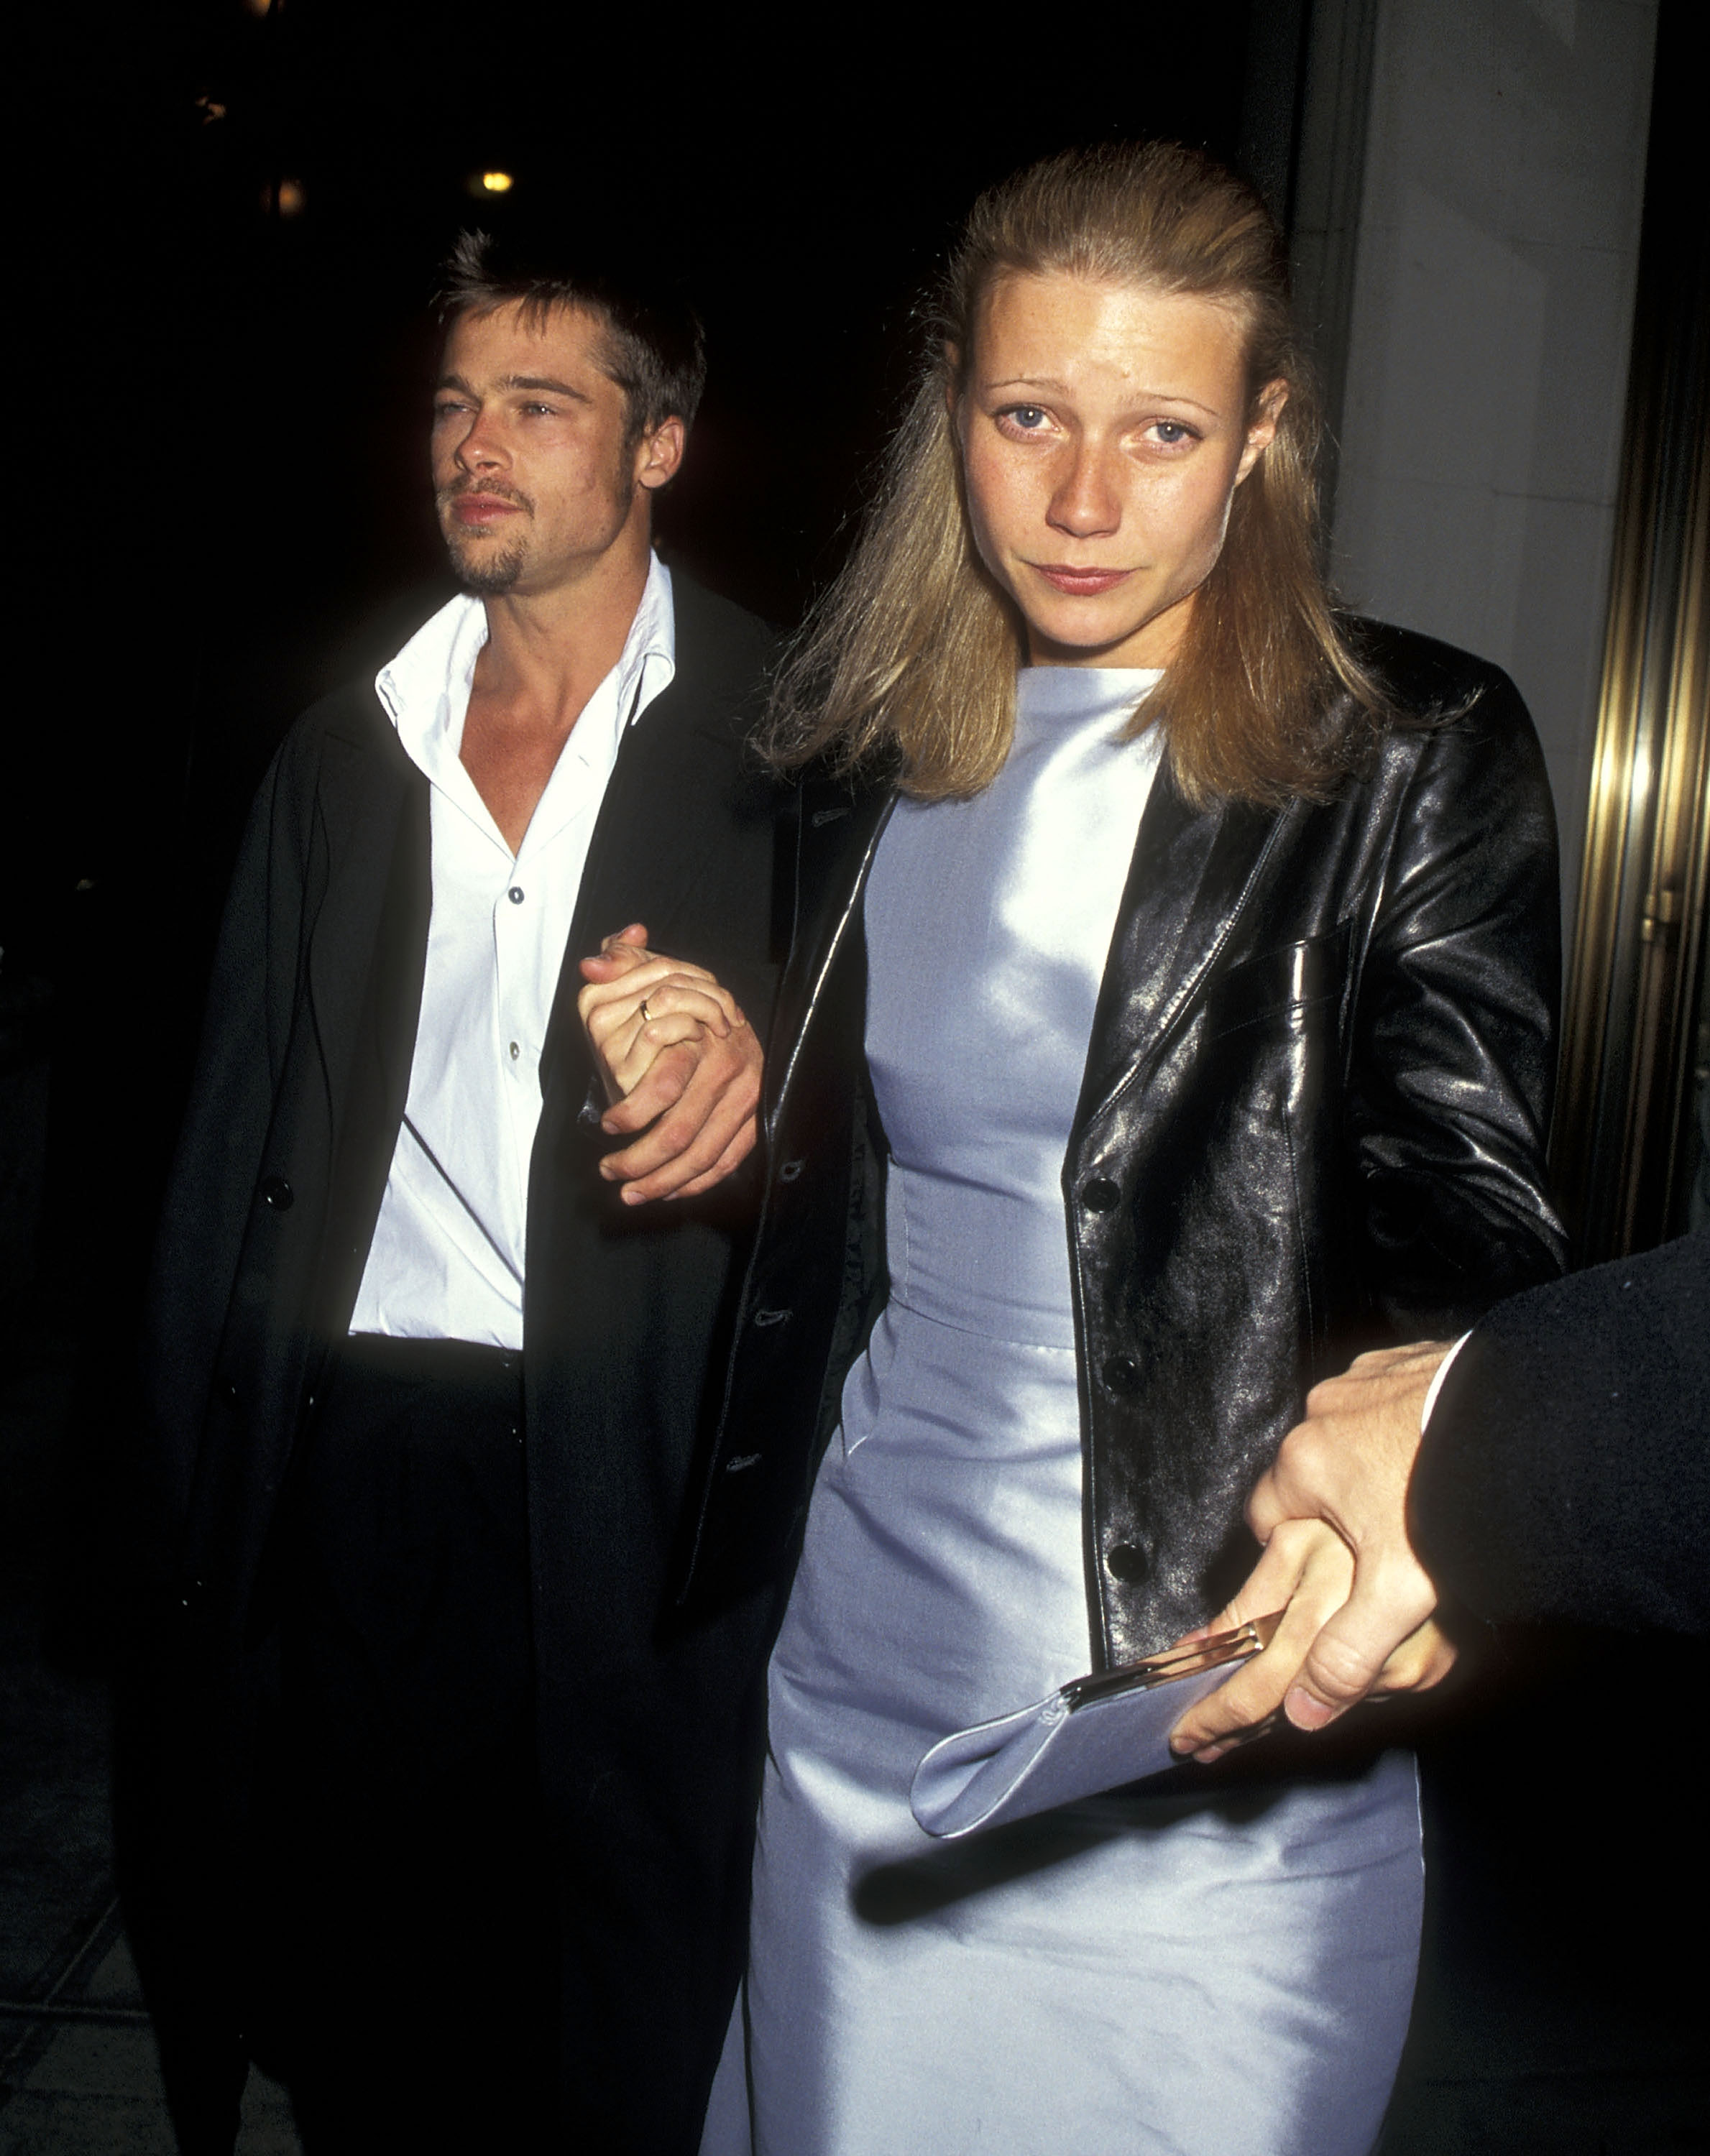 Brad Pitt and Gwyneth Paltrow at the "Hamlet" Broadway Play Opening Night Performance on May 2, 1995, in New York City | Source: Getty Images